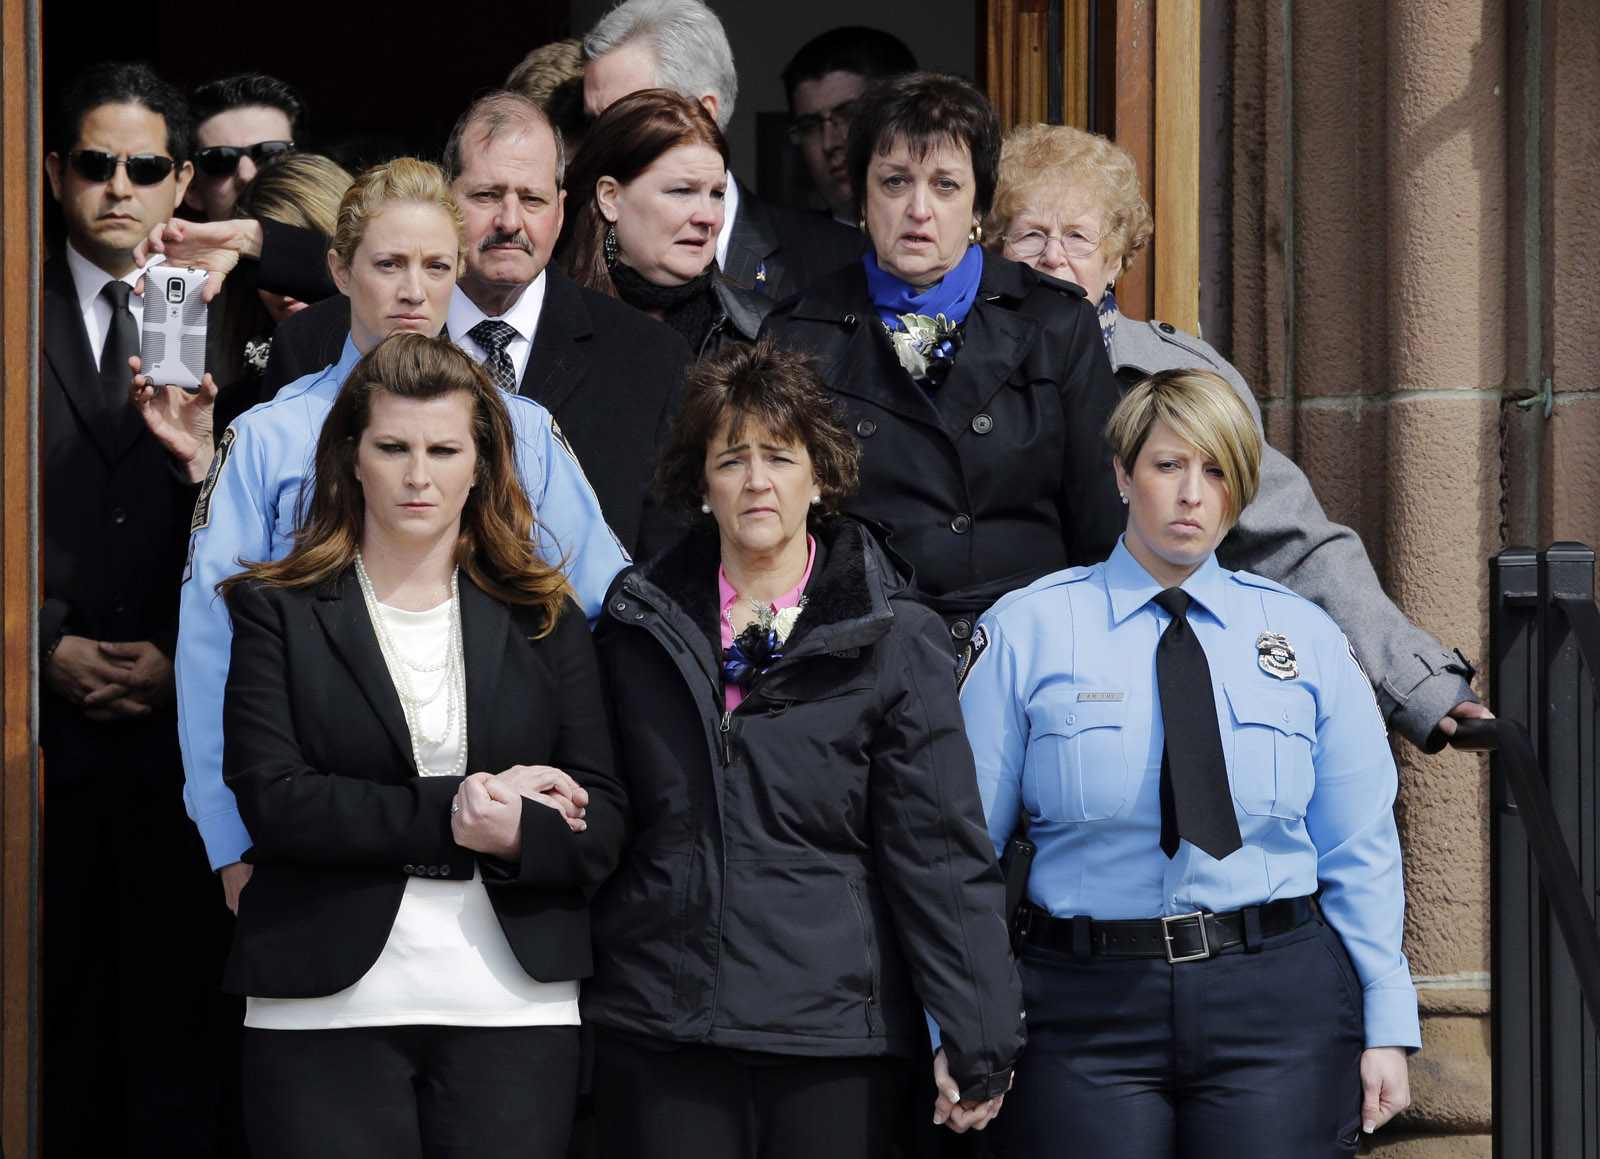 Sharon Guindon, bottom center, mother of slain Prince William County, Va., Police Officer Ashley Guindon, leads mourners out of Sacred Heart Church after her funeral, Monday, March 7, 2016, in Springfield, Mass. Guindon, 28, a Springfield native, was killed during her first shift on the job Feb. 27, 2016 while responding to a domestic dispute in Woodbridge, Va. On the one year anniversary of Ashley's death, Sharon Guindon released a letter thanking scores of people and businesses who helped her family in the chaotic hours and days after the shooting. (AP Photo/Elise Amendola)